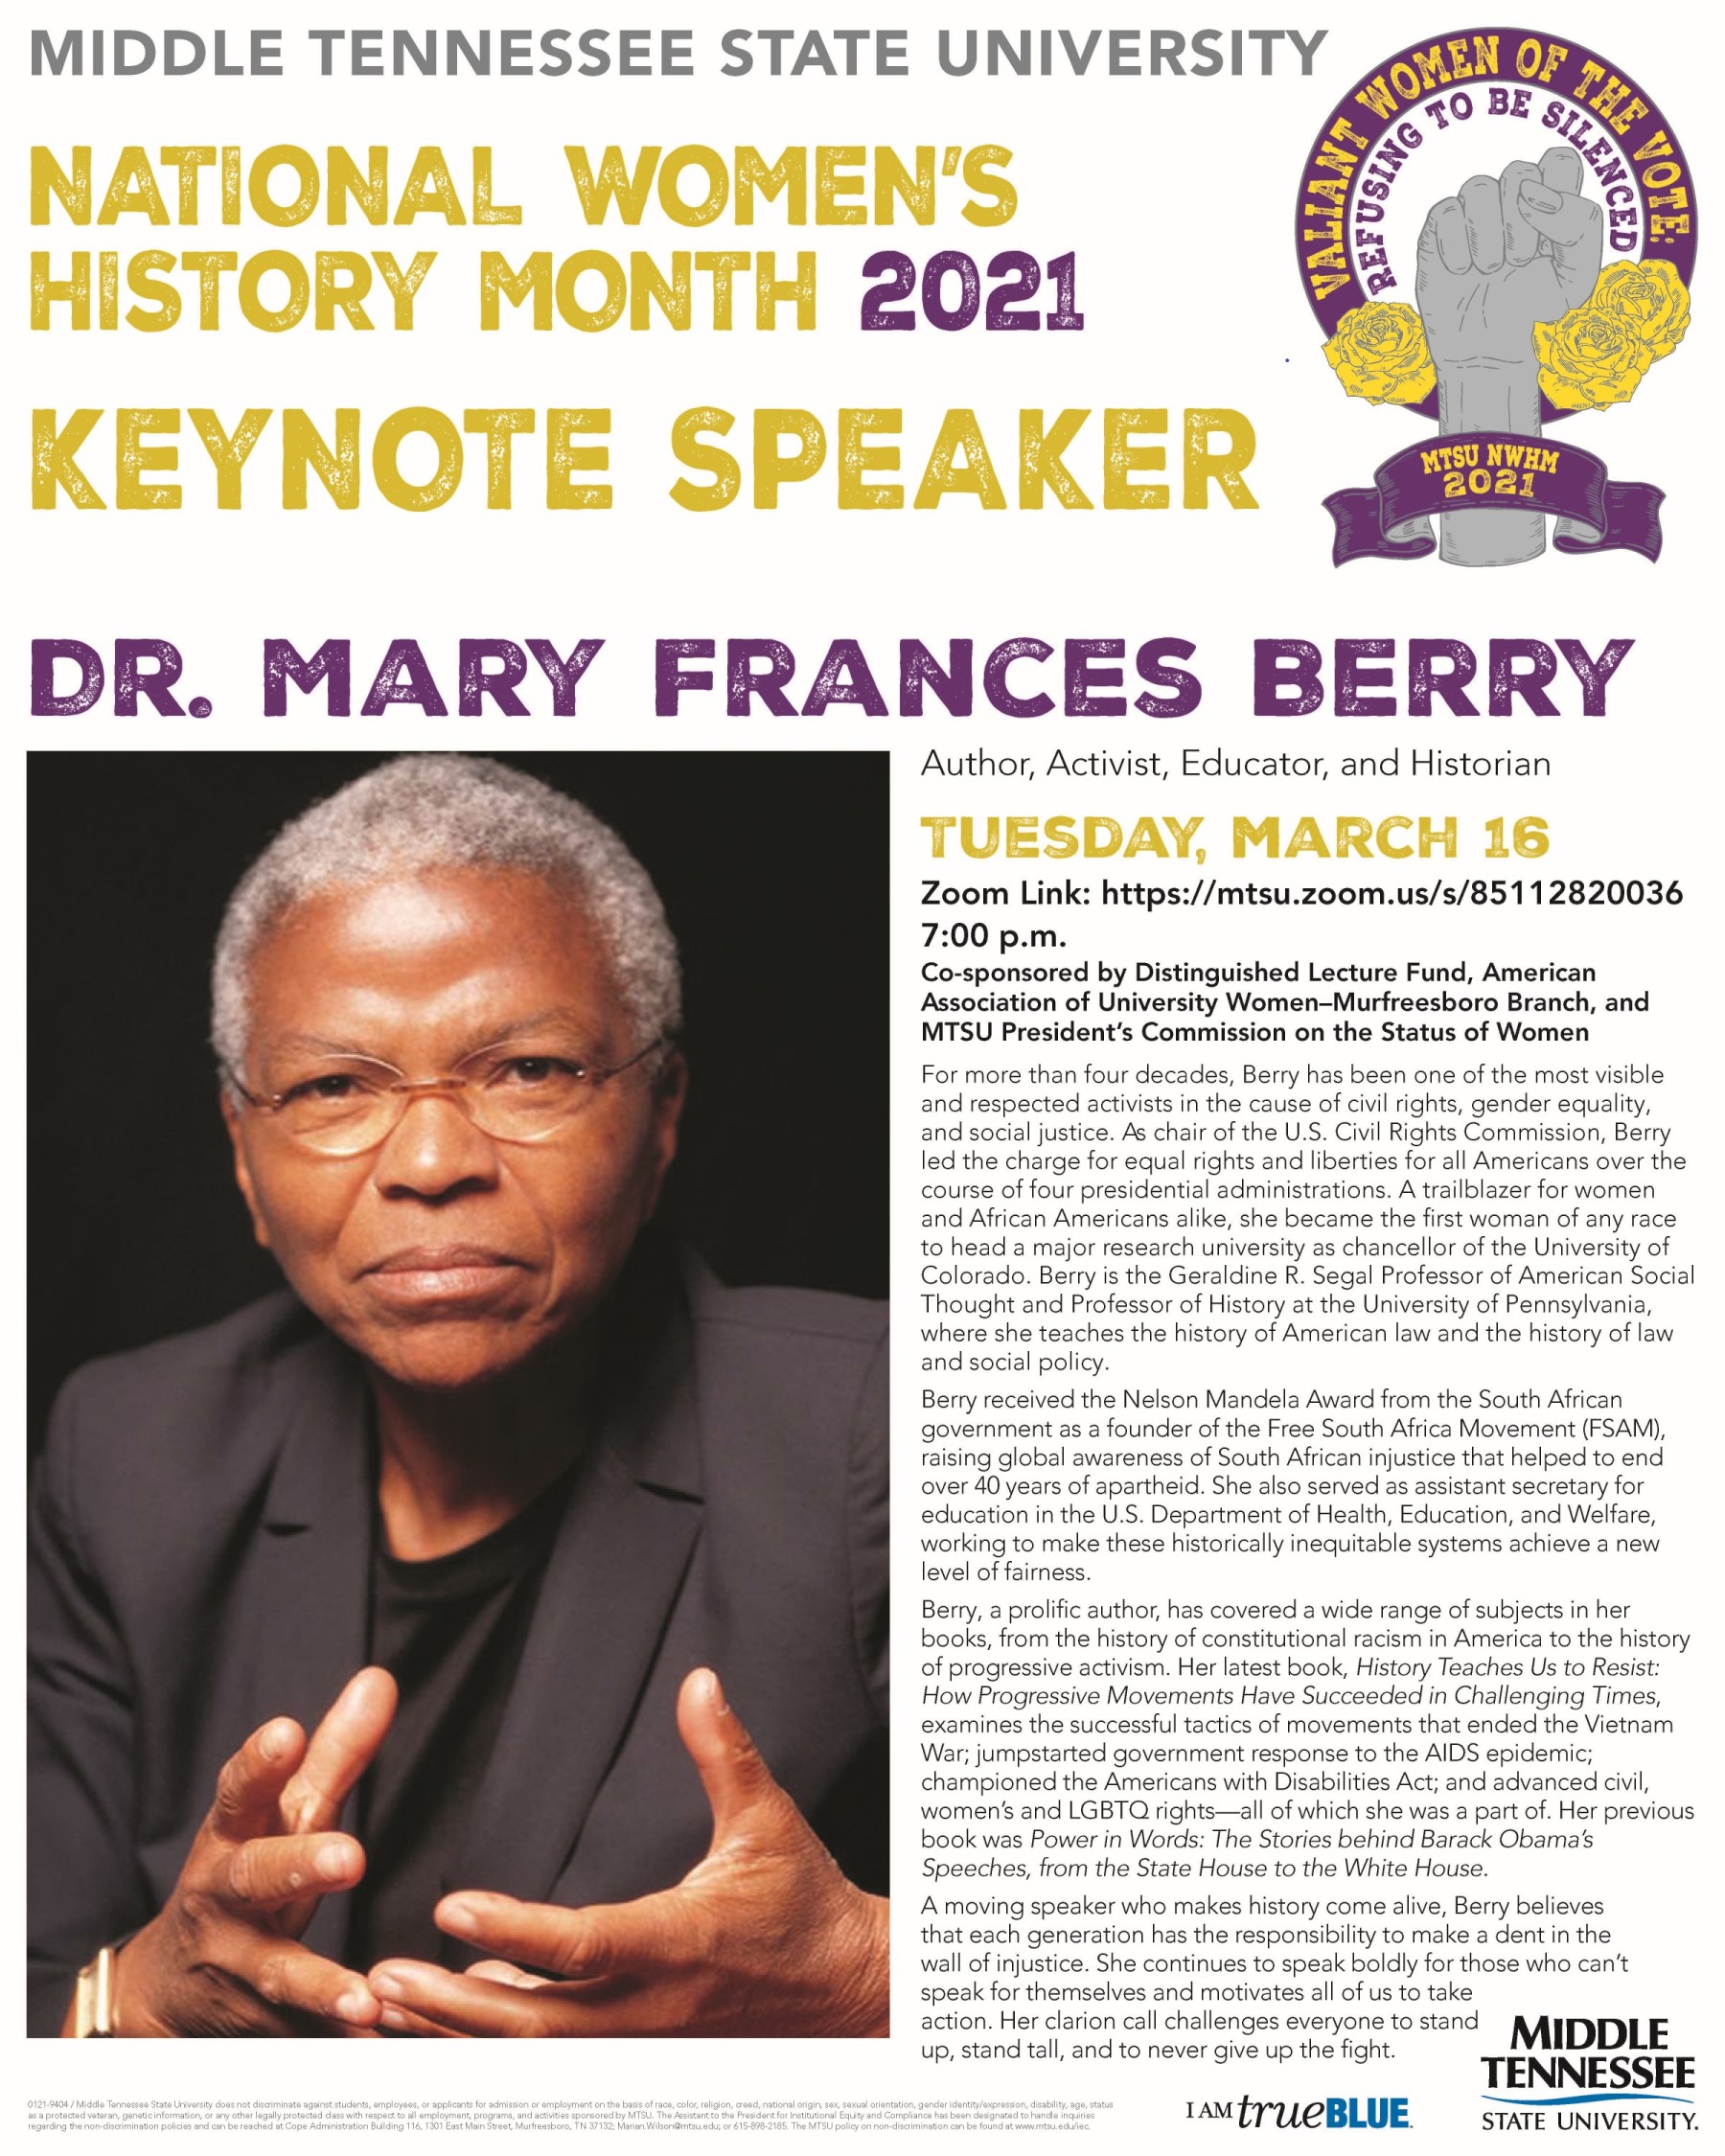 A poster with yellow and purple font advertising the keynote speaker, Dr. Mary Frances Berry, presenting Tuesday, March 16th 2021 at 7PM via Zoom.